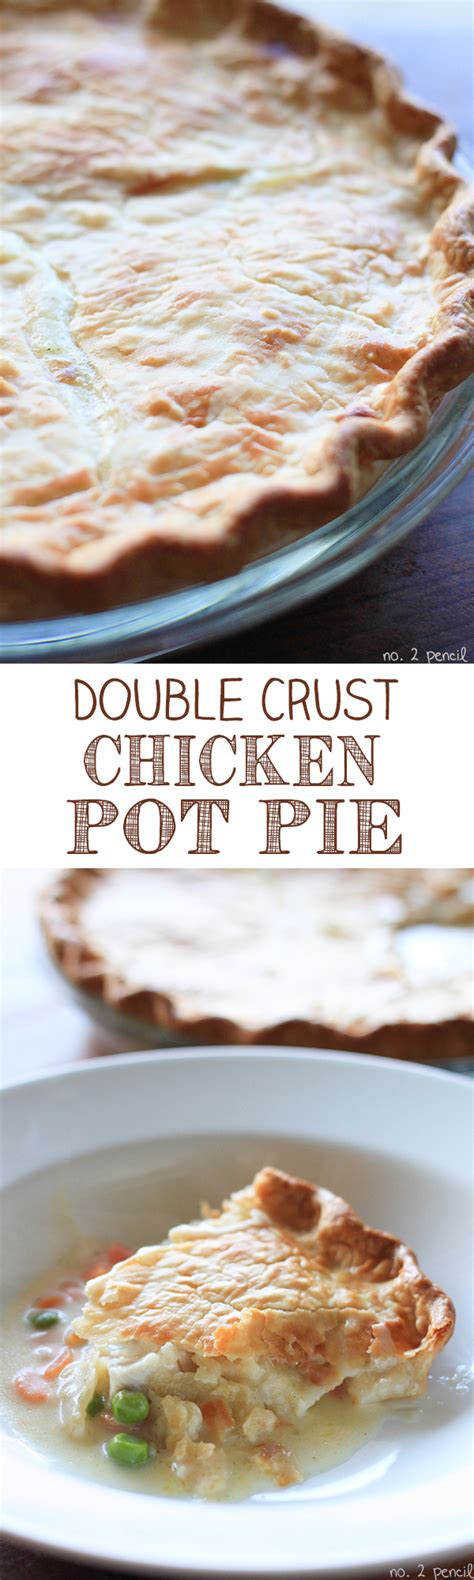 This homemade chicken pot pie recipe streamlines your work by using frozen peas and carrots and refrigerated pillsbury™ pie crusts. Double Crust Chicken Pot Pie - Great Freezer Meal Idea